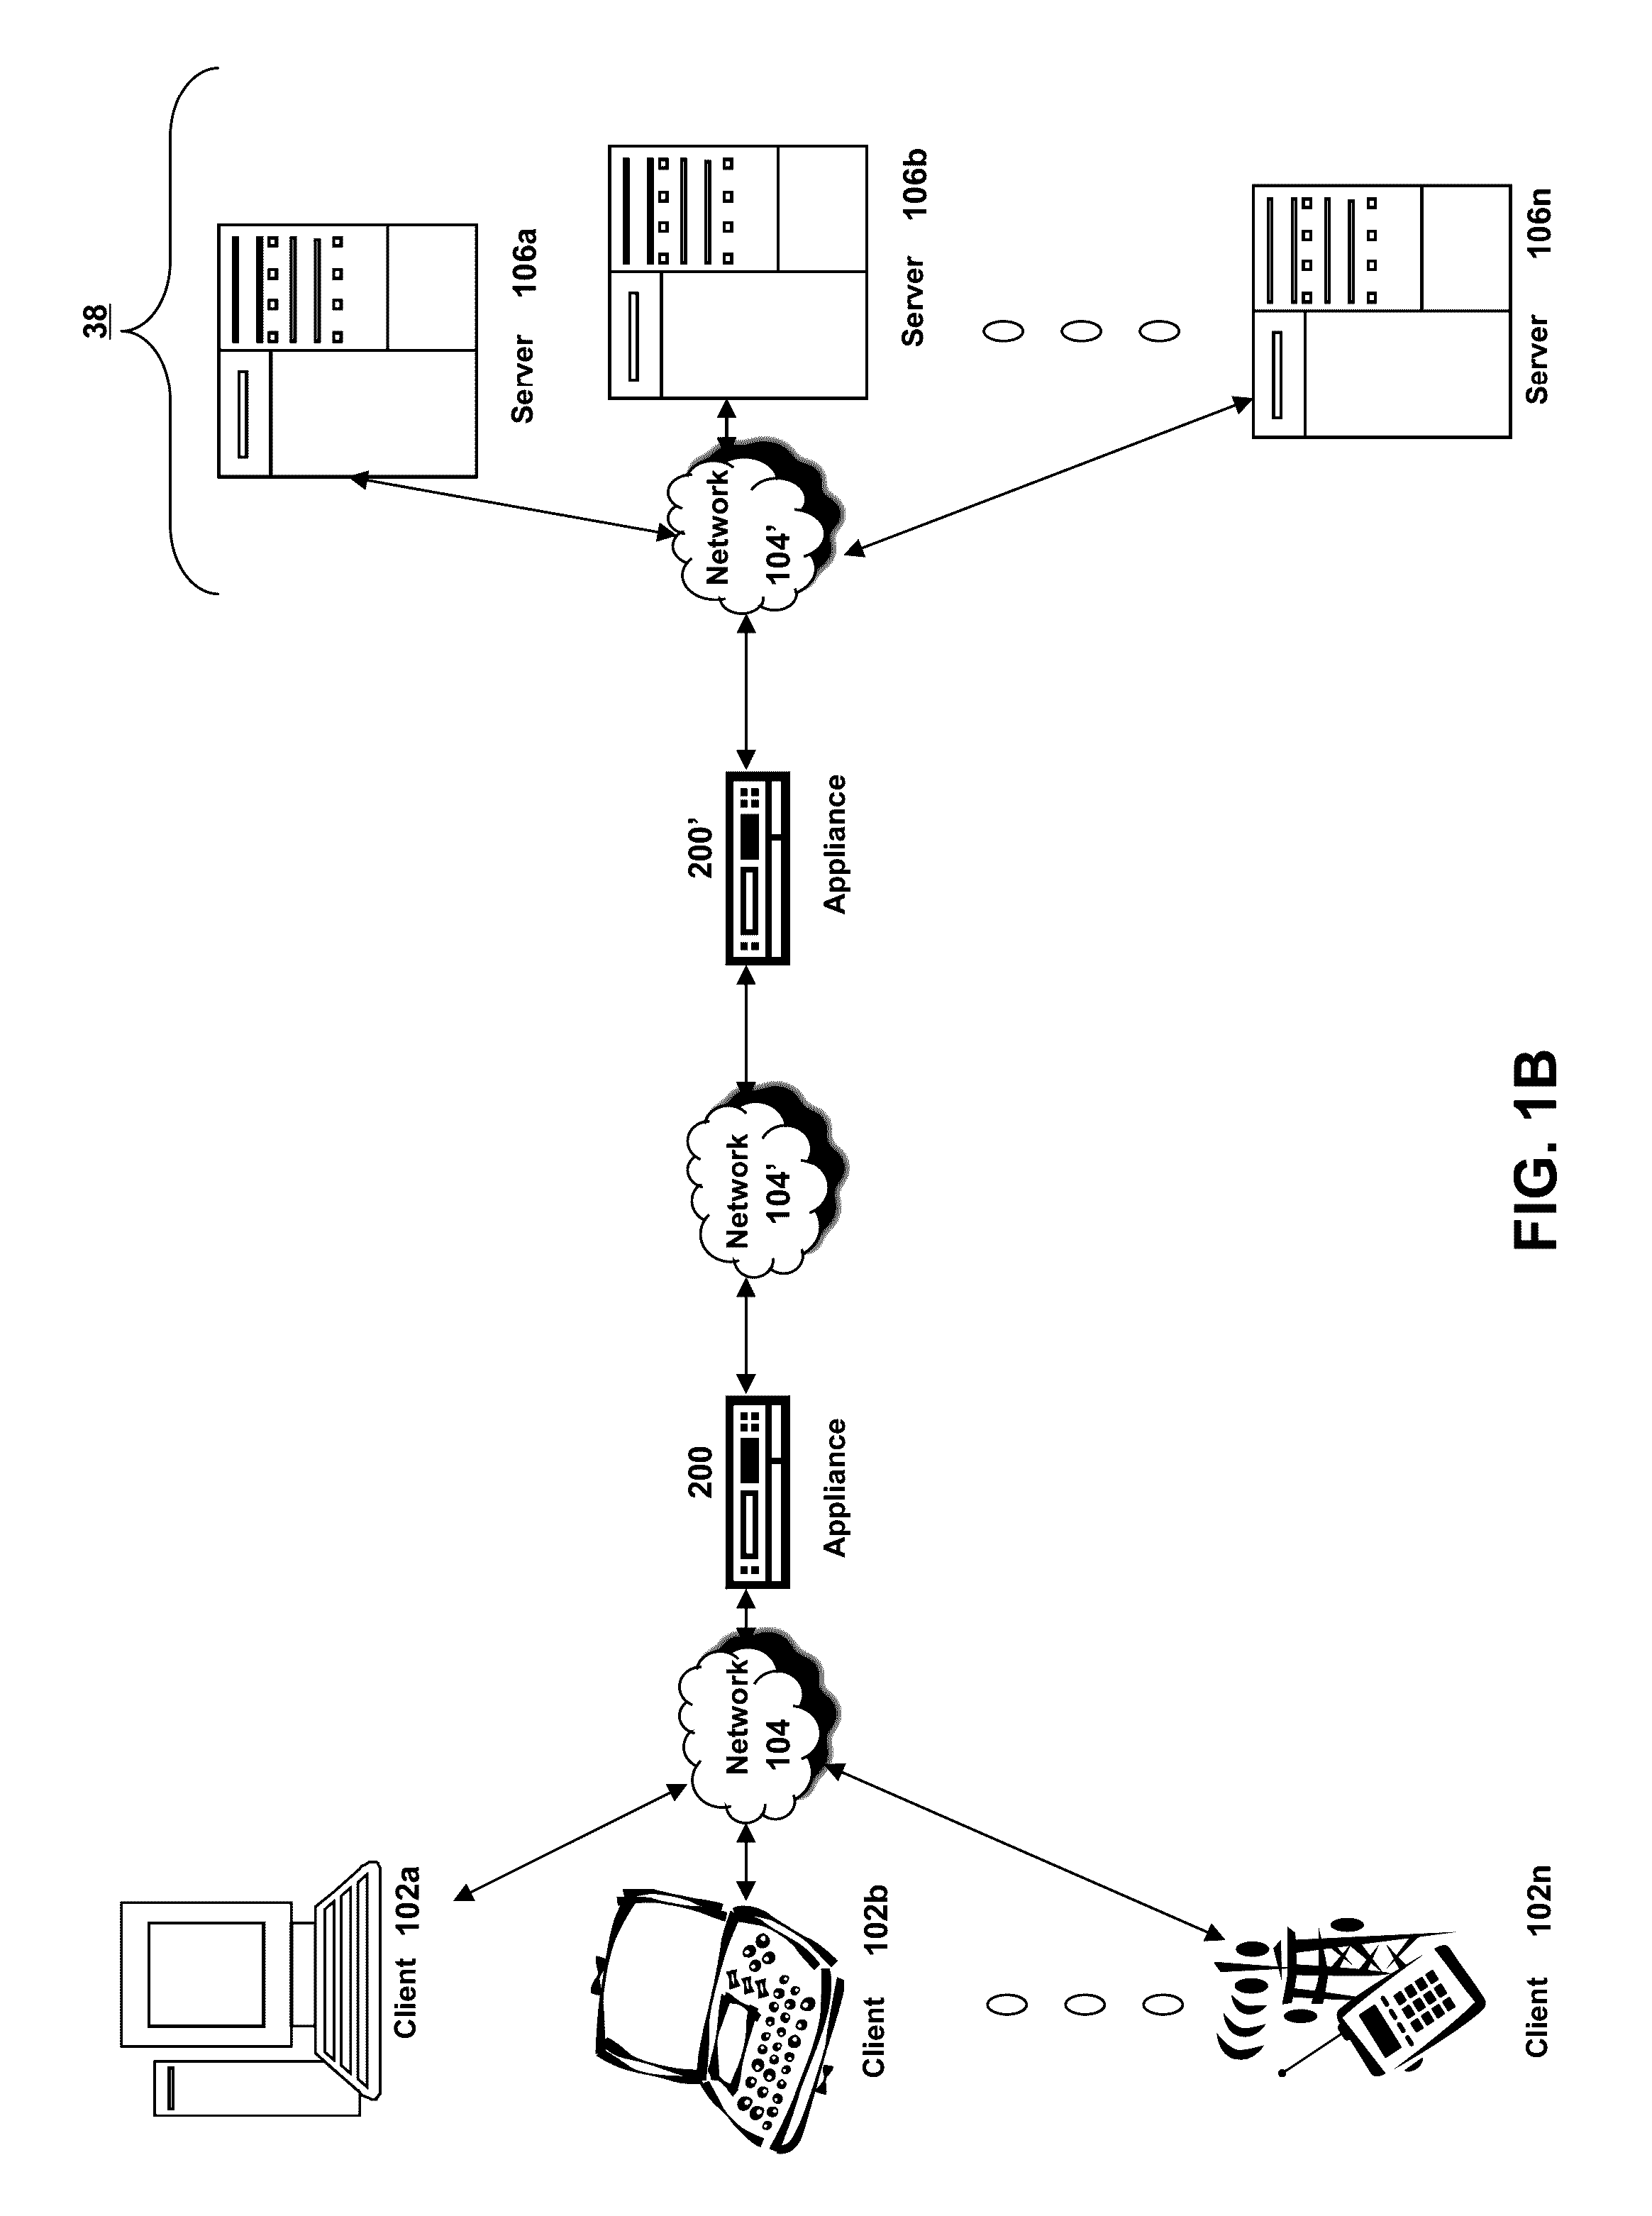 Systems and methods for performing load balancing and message routing for short message peer to peer protocol